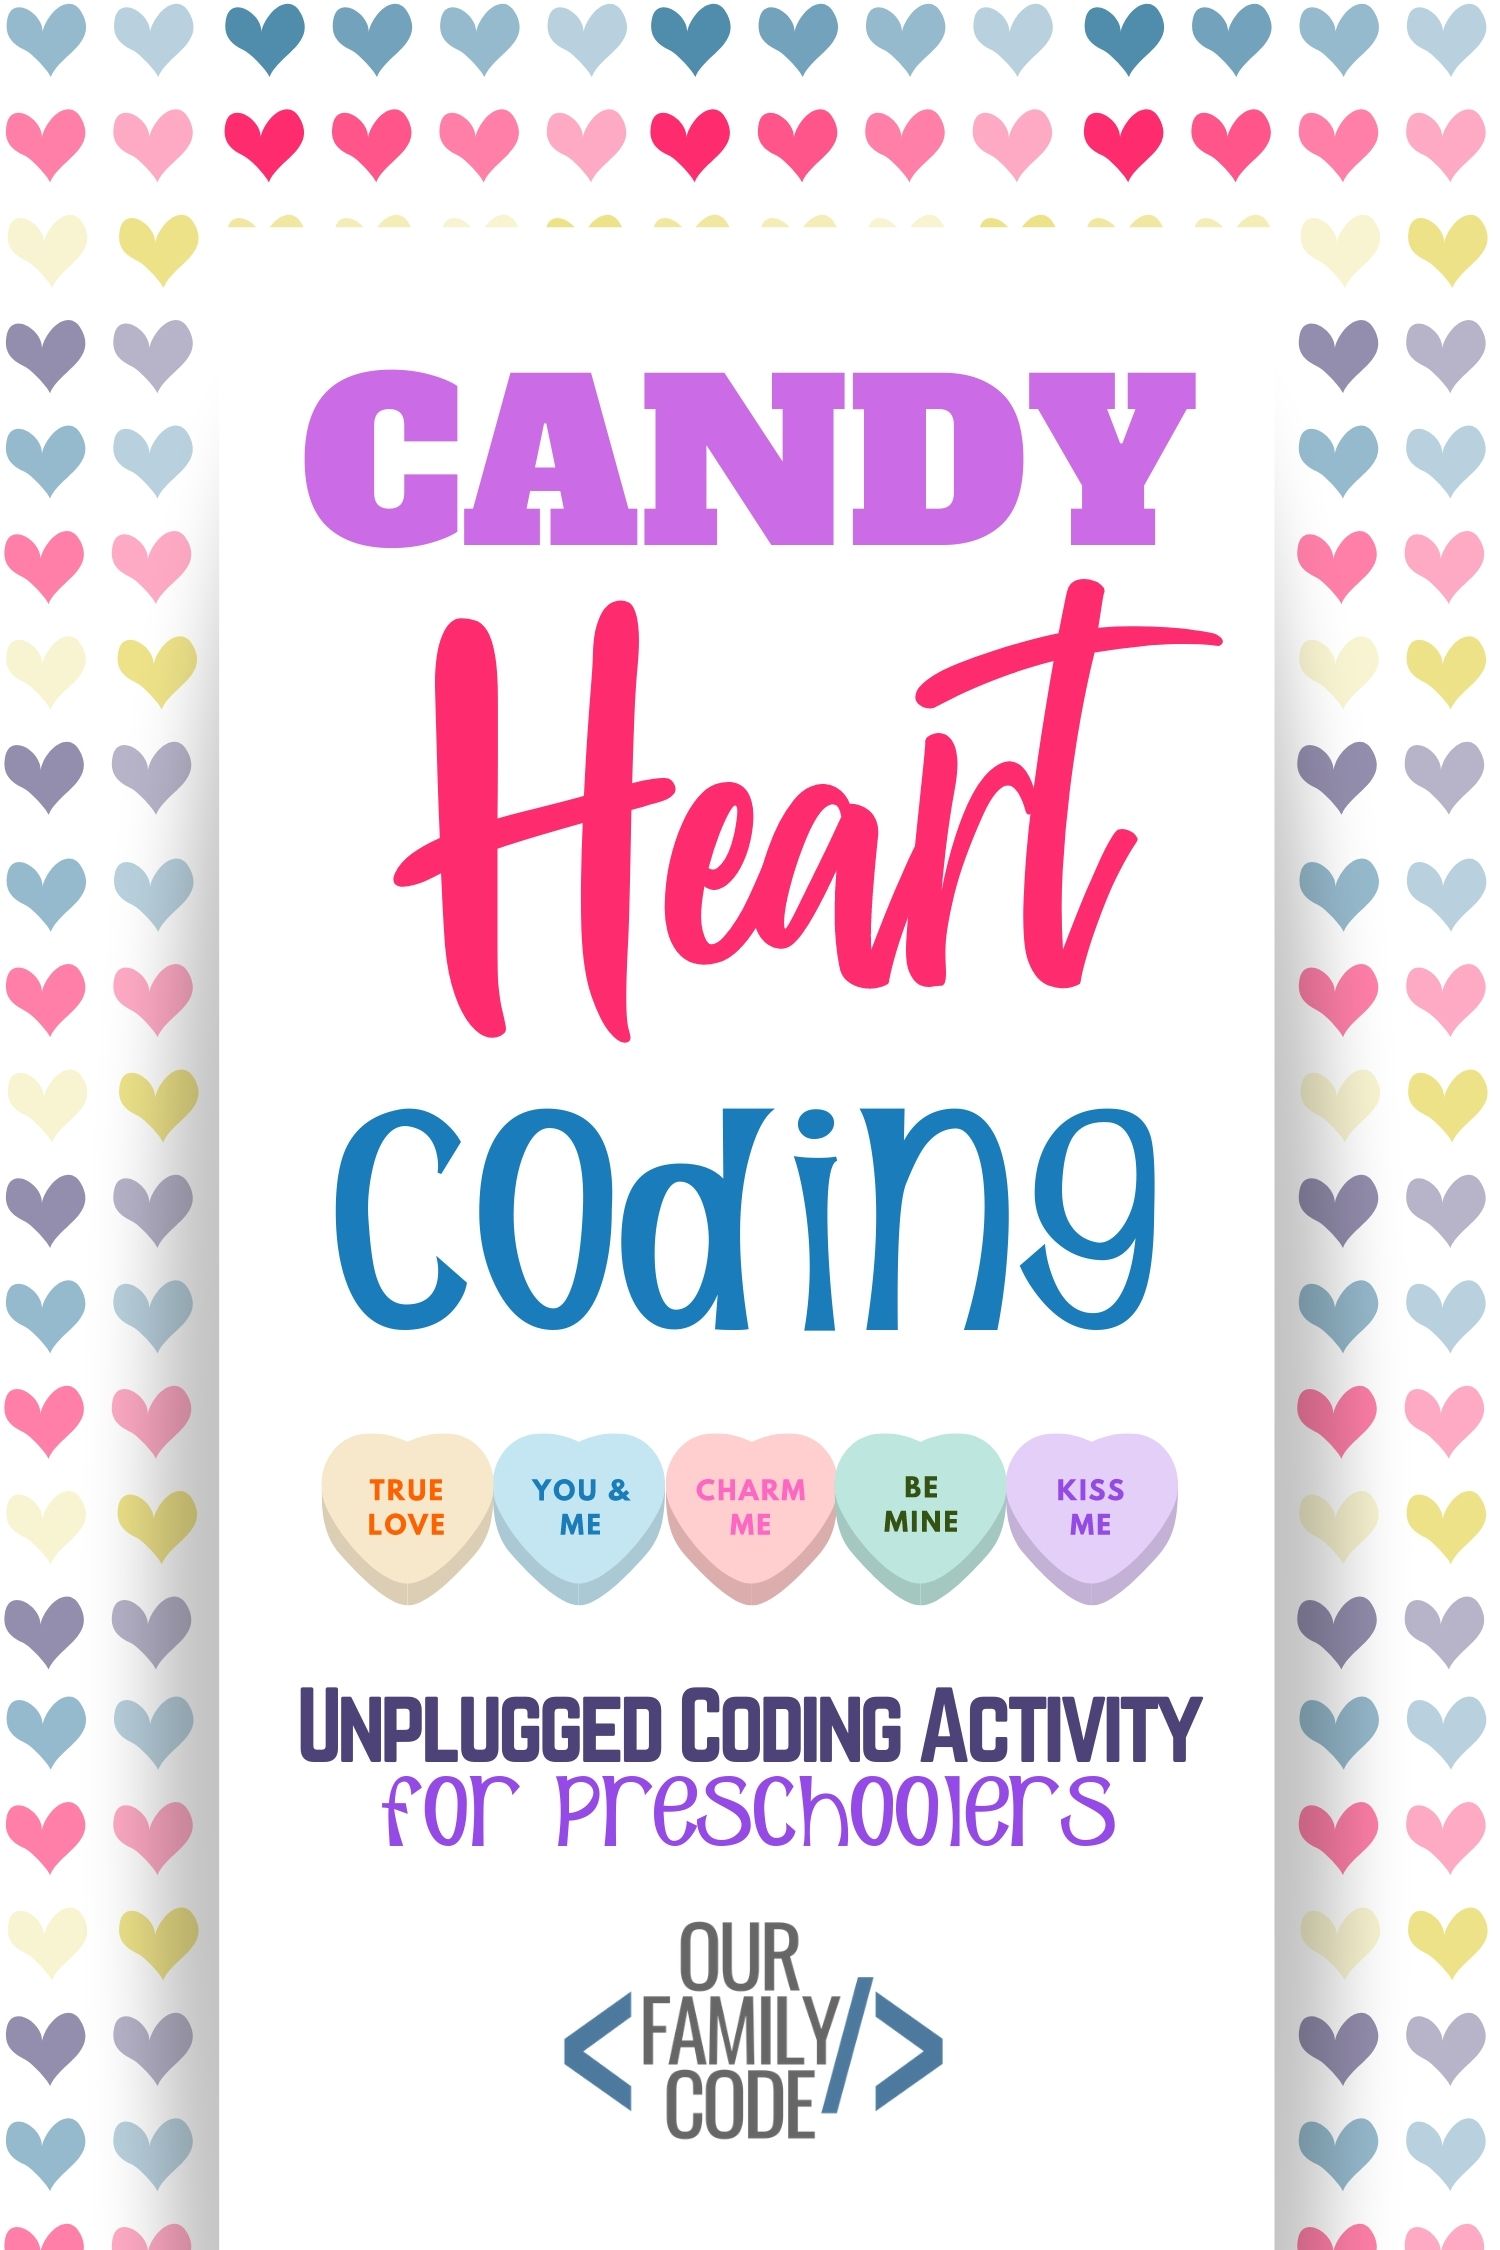 Grab these free preschool unplugged coding worksheet to practice sequencing today and finish writing sequences with Valentine's Day candy hearts! #coding #teachkidstocode #STEAM #STEM #ValentinesDay